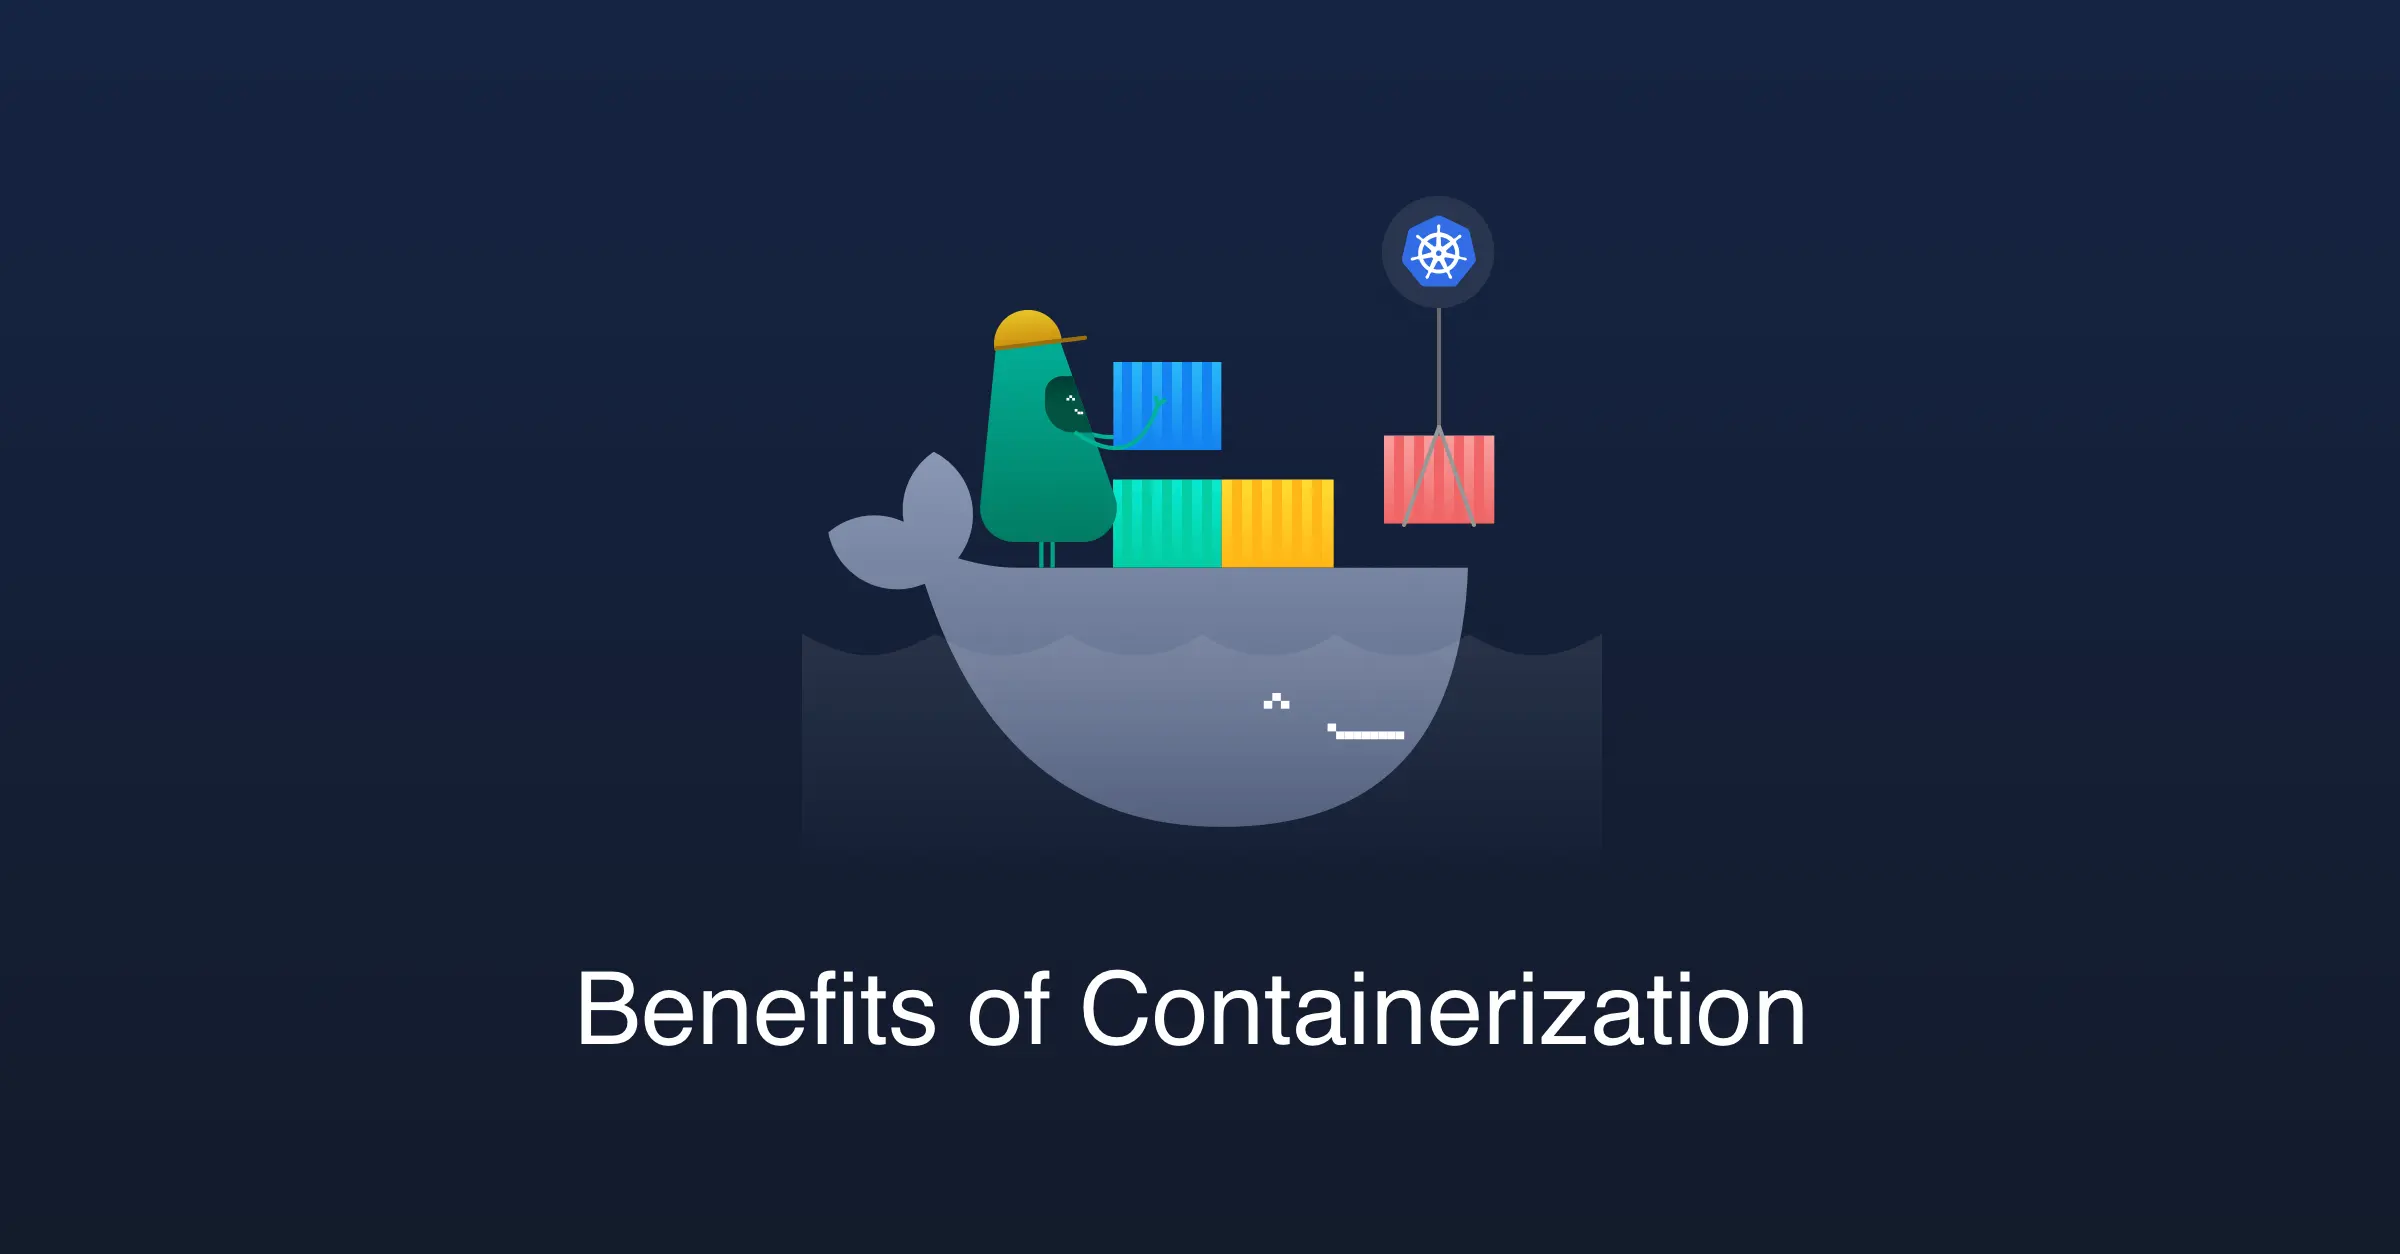 The Benefits of Containerization